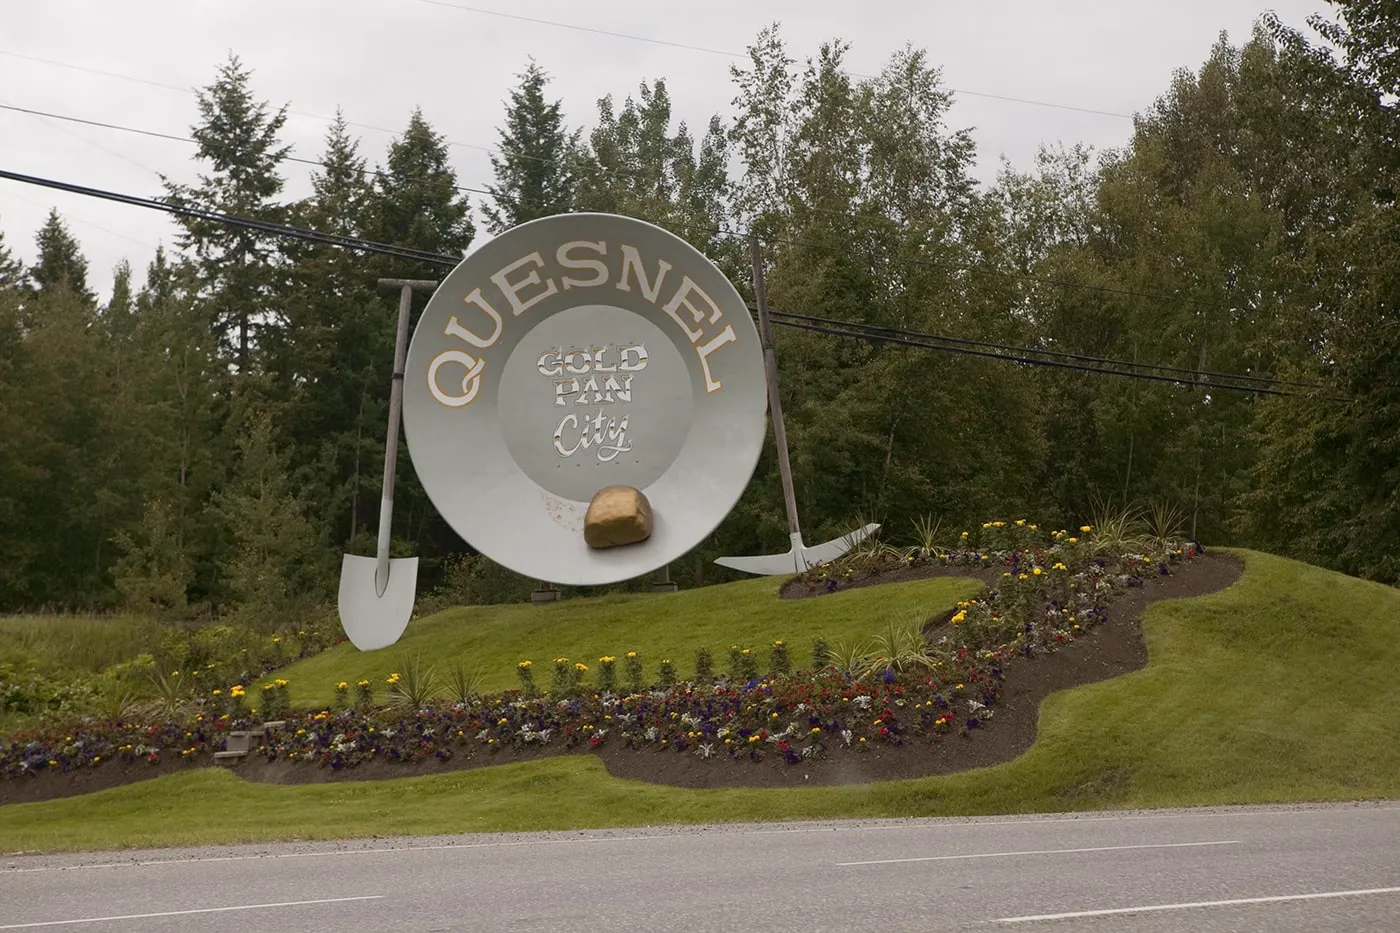 World's Largest Gold Pan - Quesnel, British Columbia, Canada